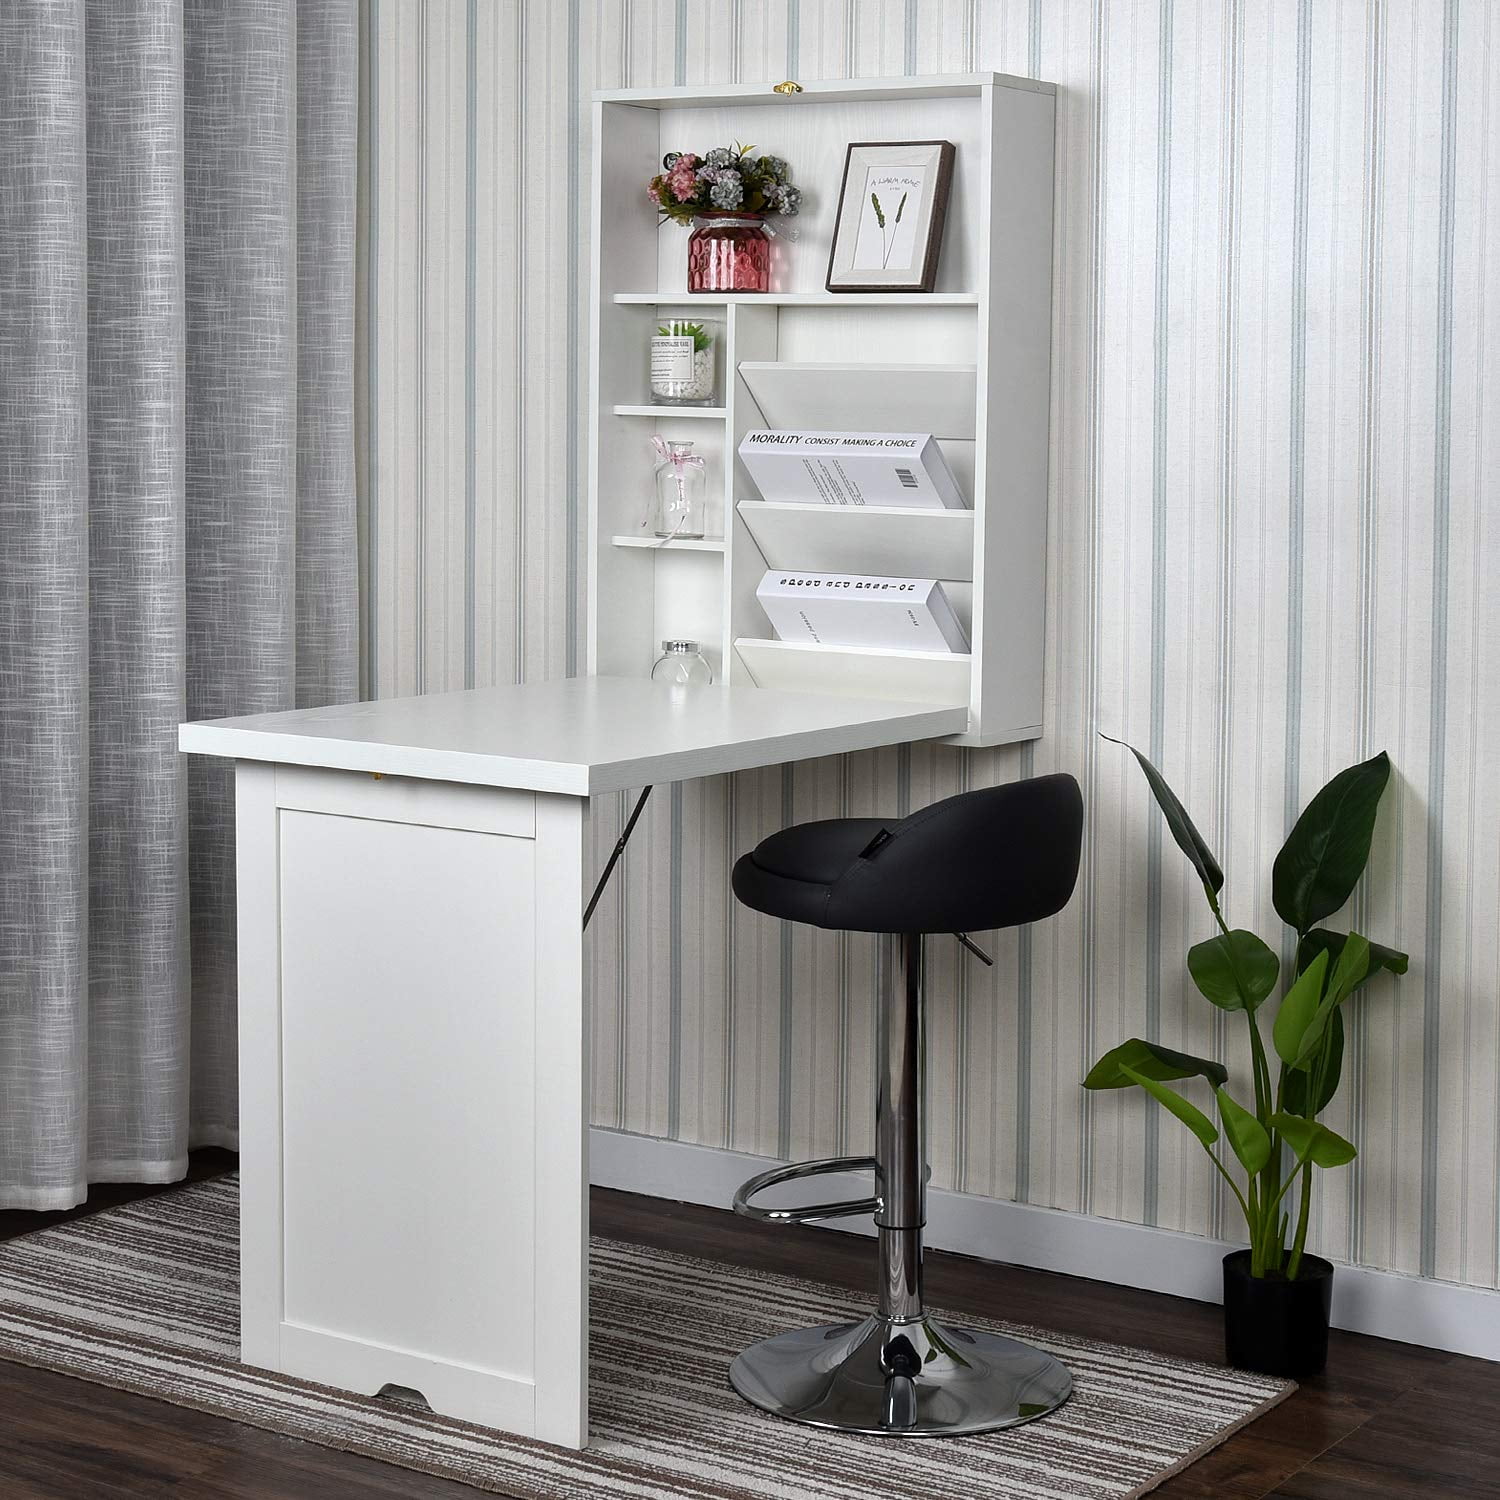  Wall Mounted Folding Desk for Small Space